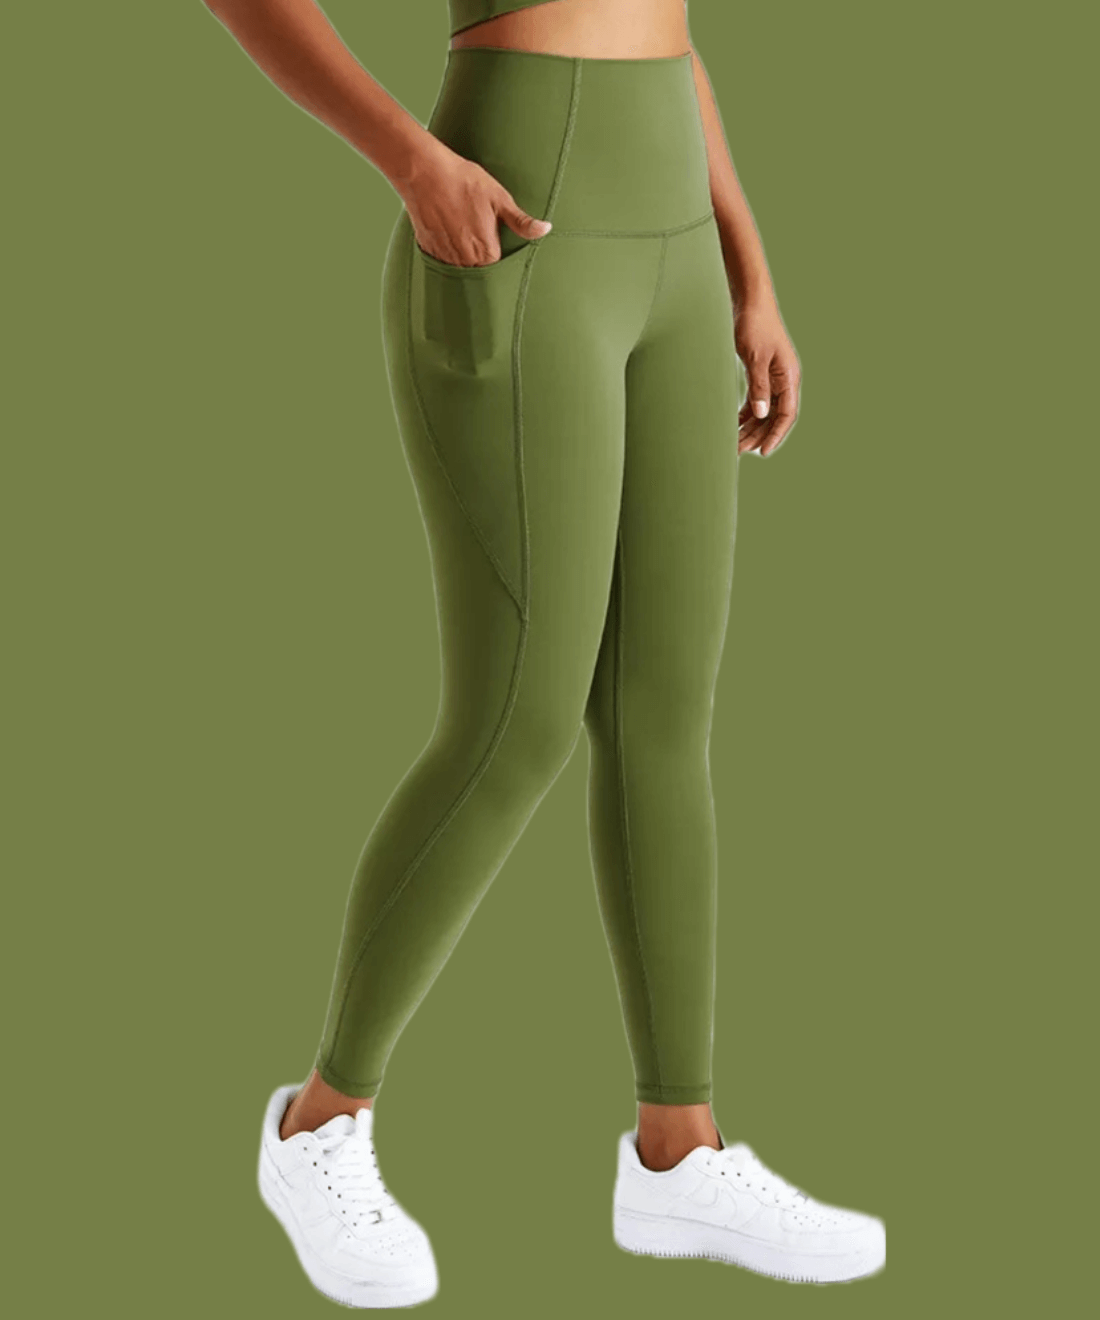 Women's Leggings With Pockets Shop All Activewear